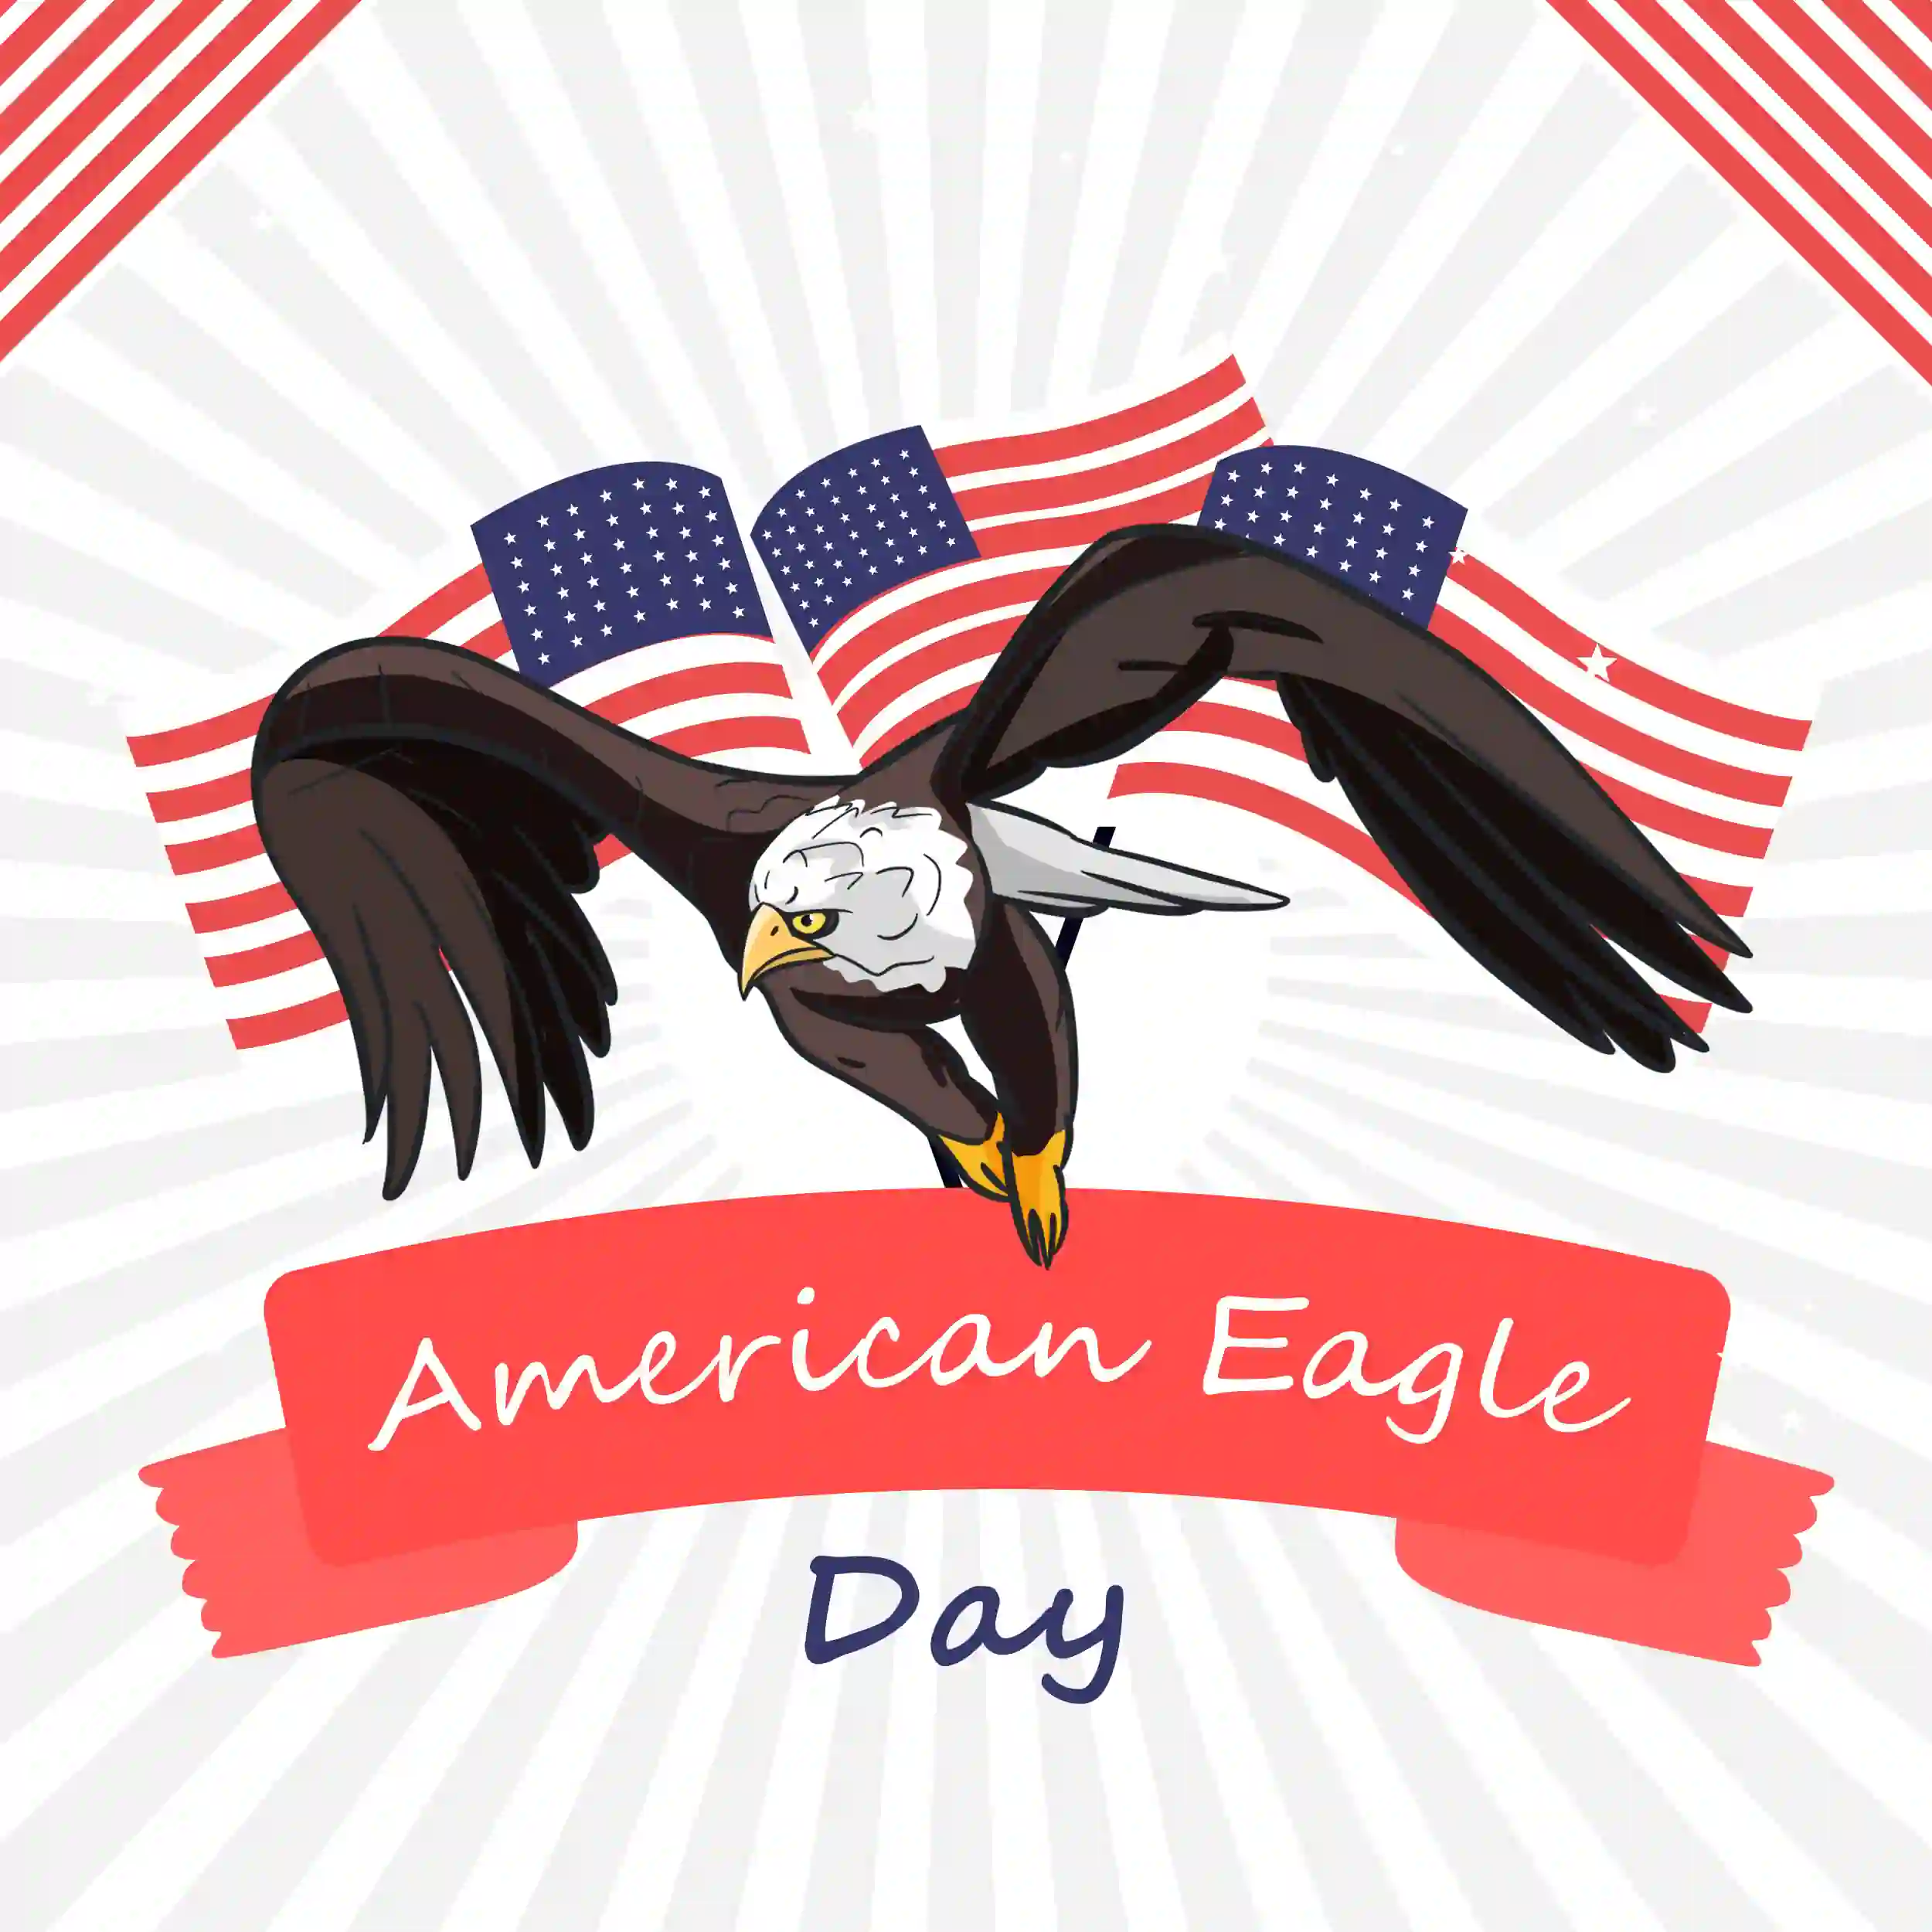 American Eagle Day PSD Free Download